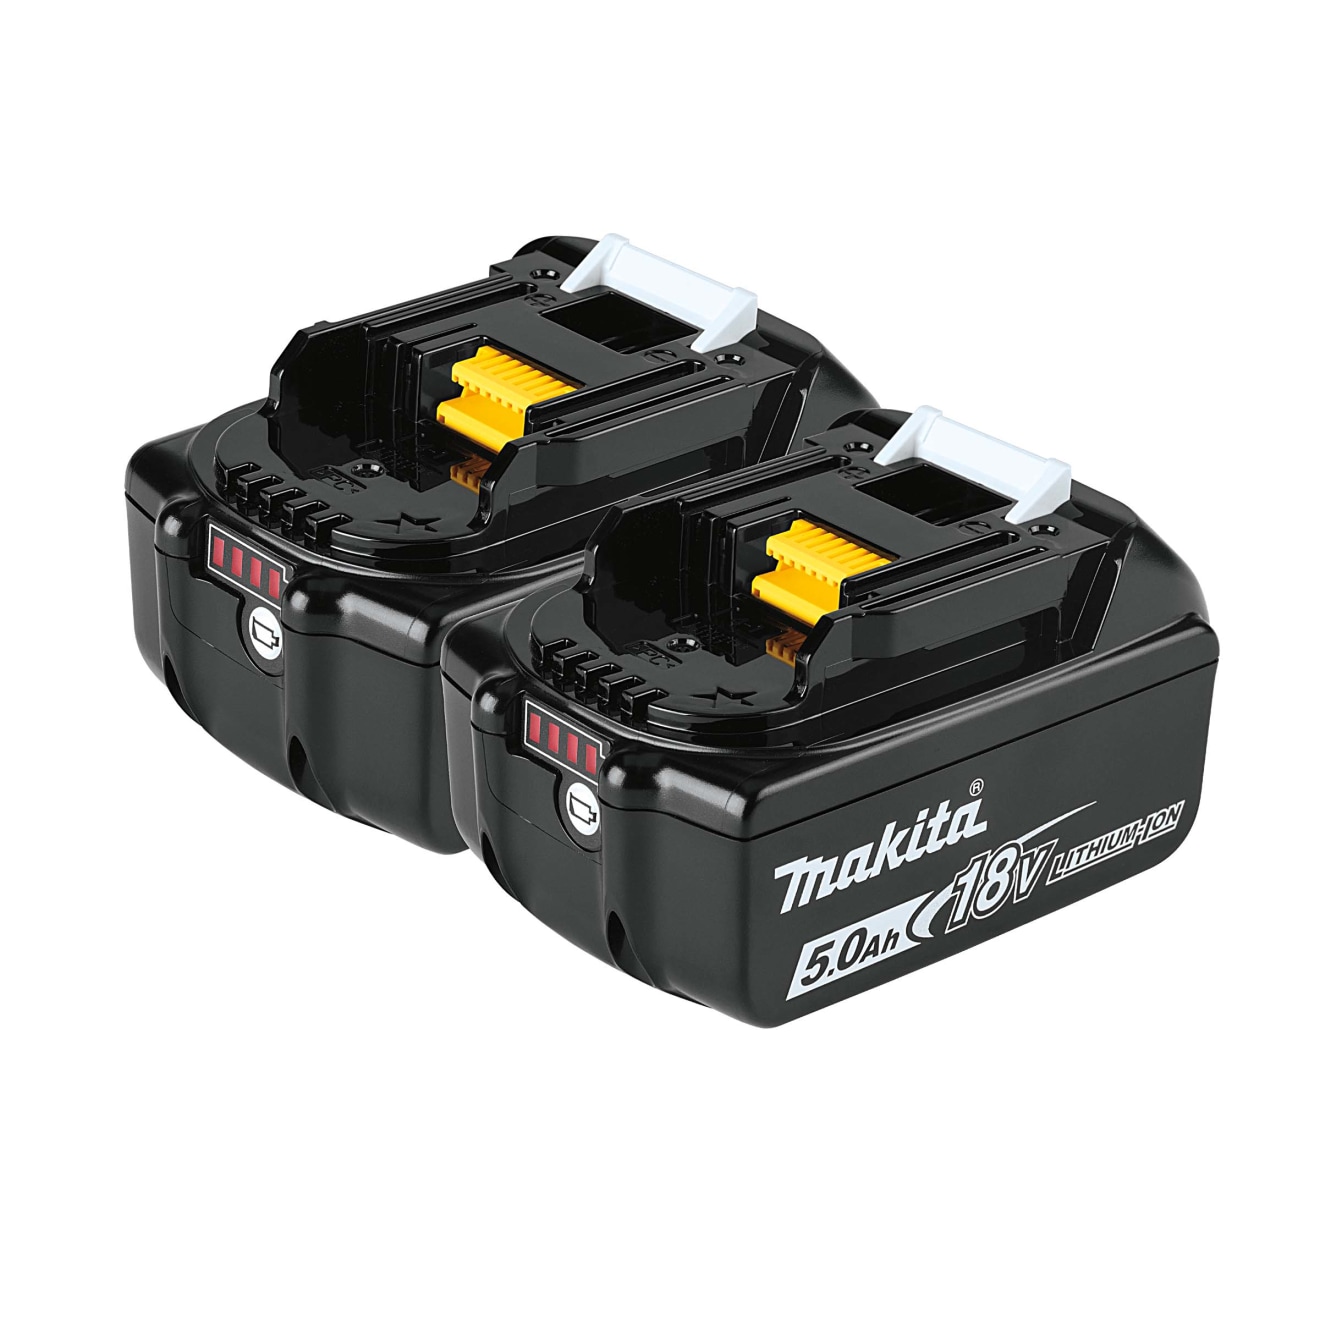 Makita 18-Vold LXT Lithium-Ion 5.0 Ah Battery Pack (2-Pack)